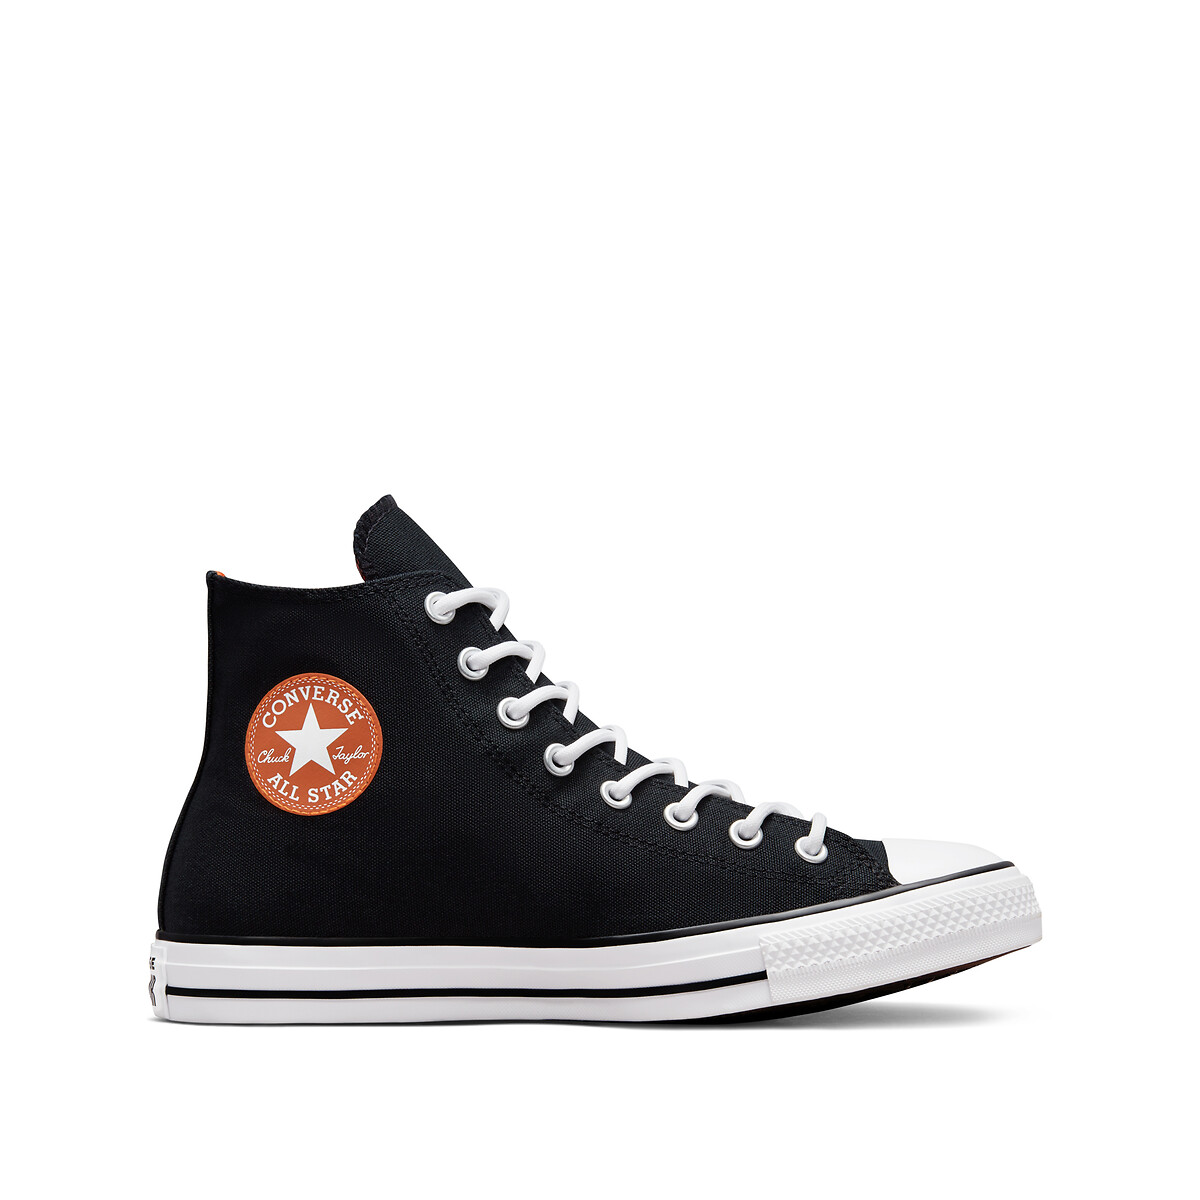 Chuck taylor all star cold fusion high 